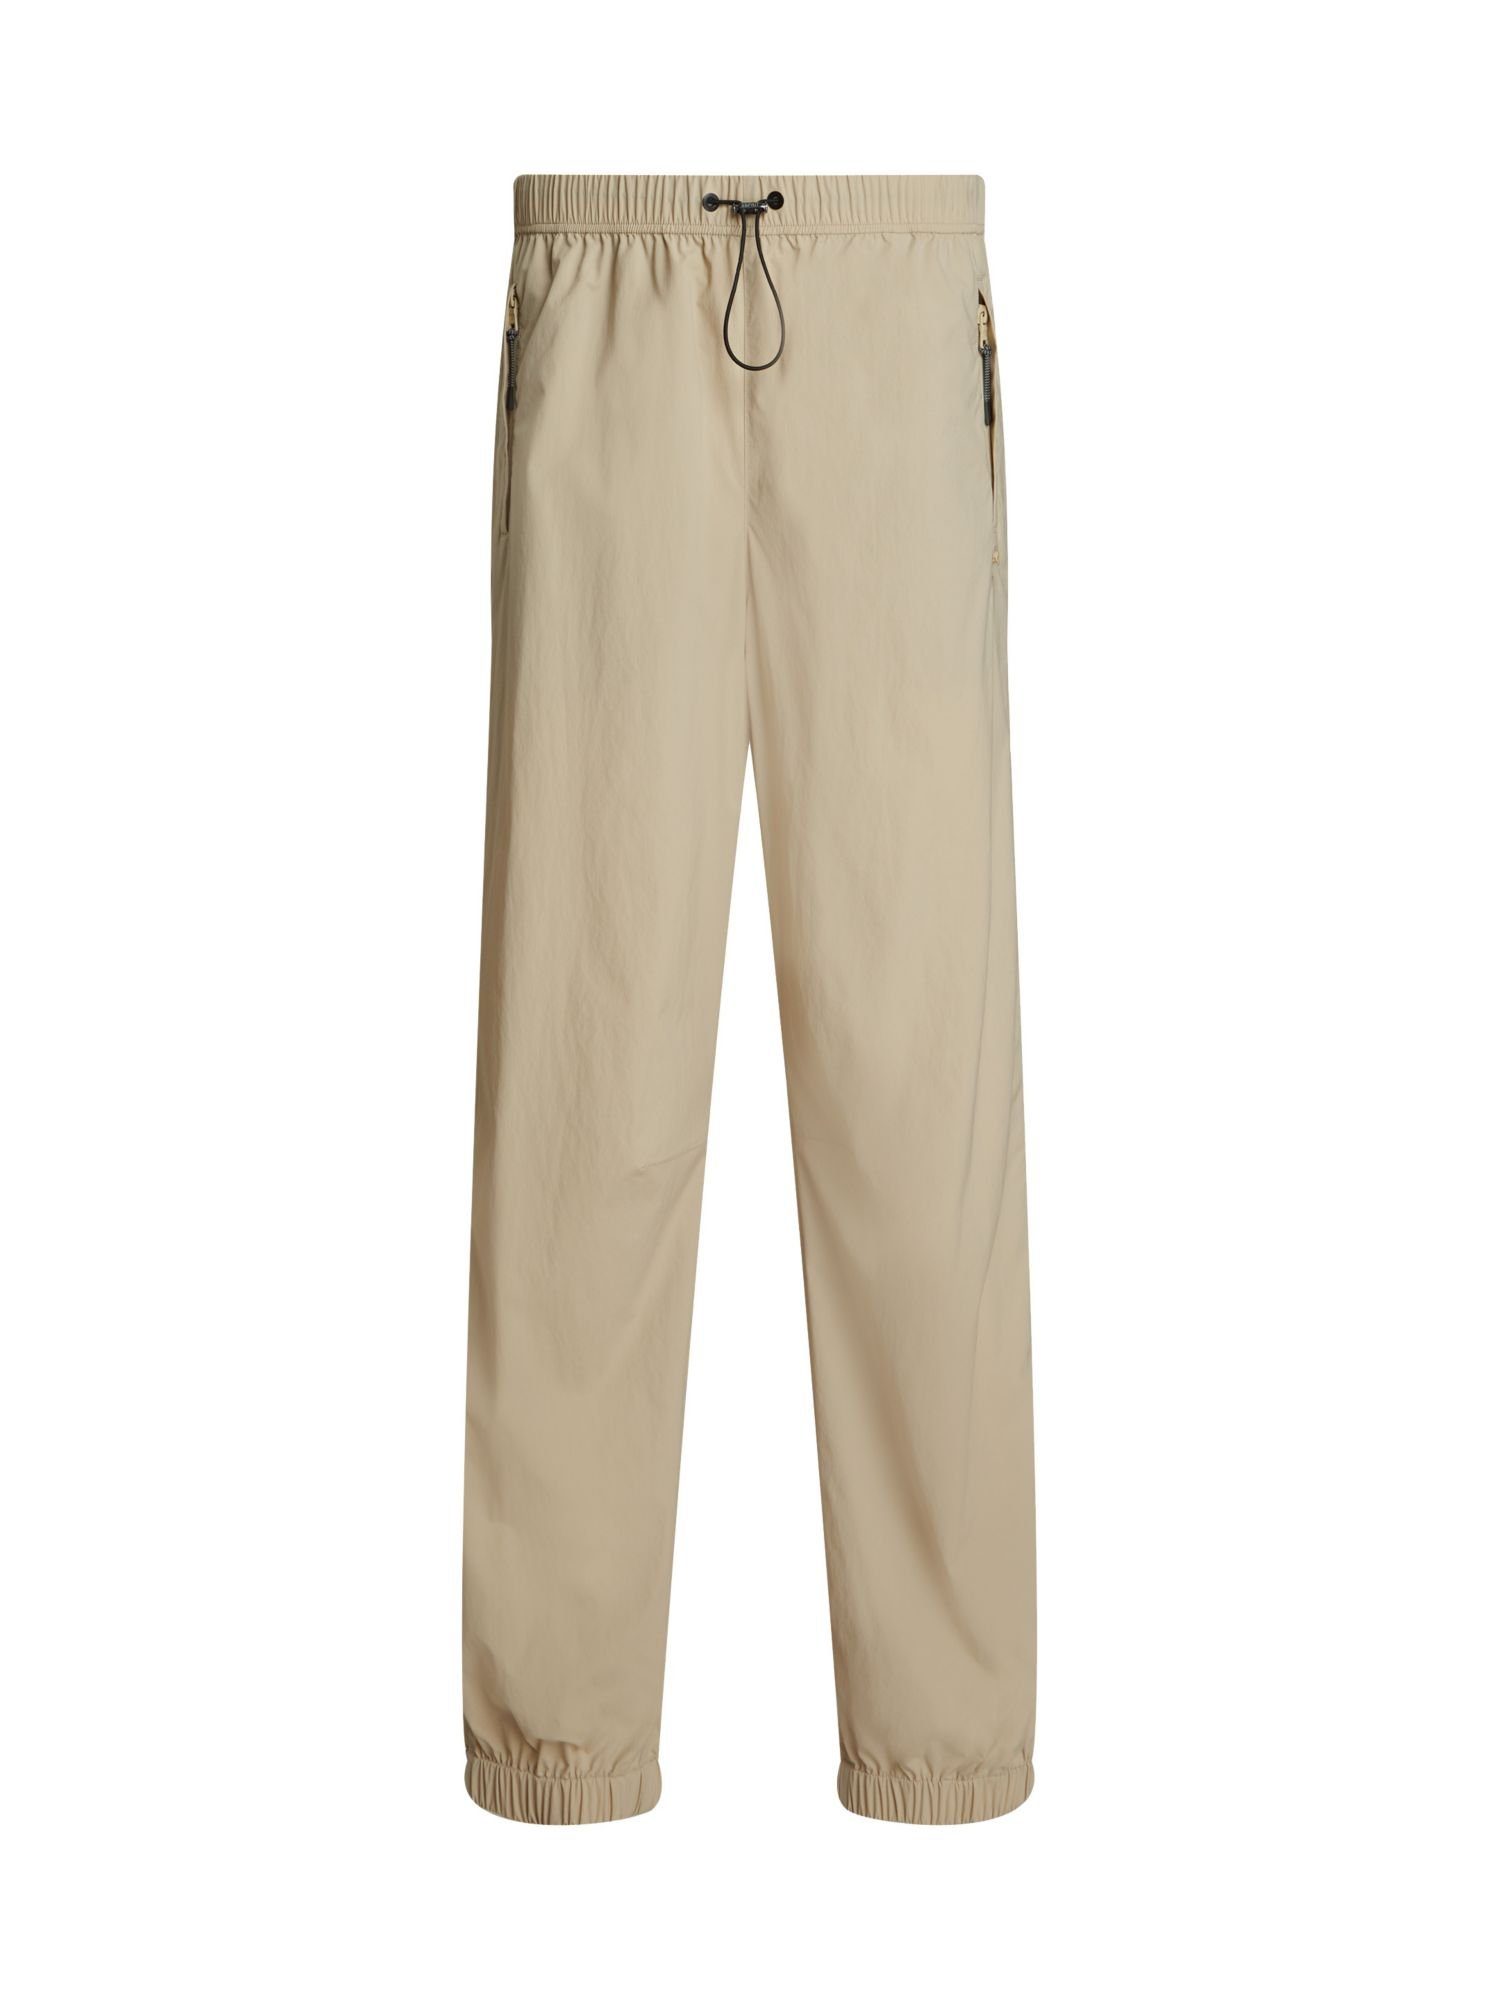 Esprit Jogger Pants Jogger im Relaxed Fit SAND